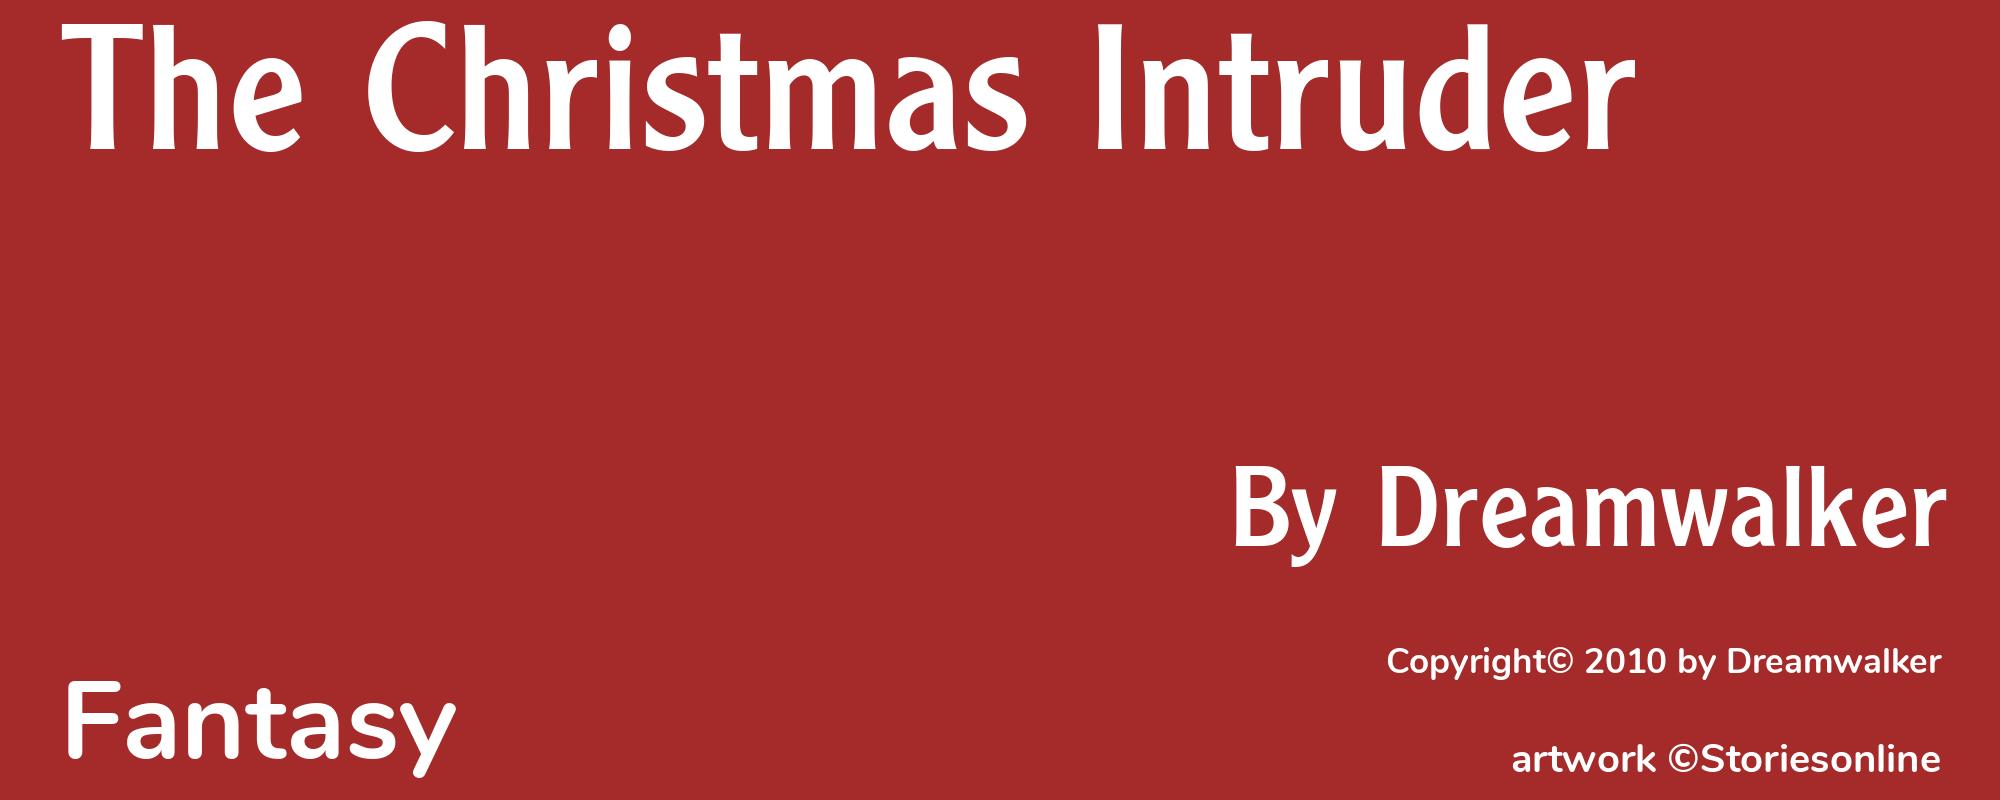 The Christmas Intruder - Cover